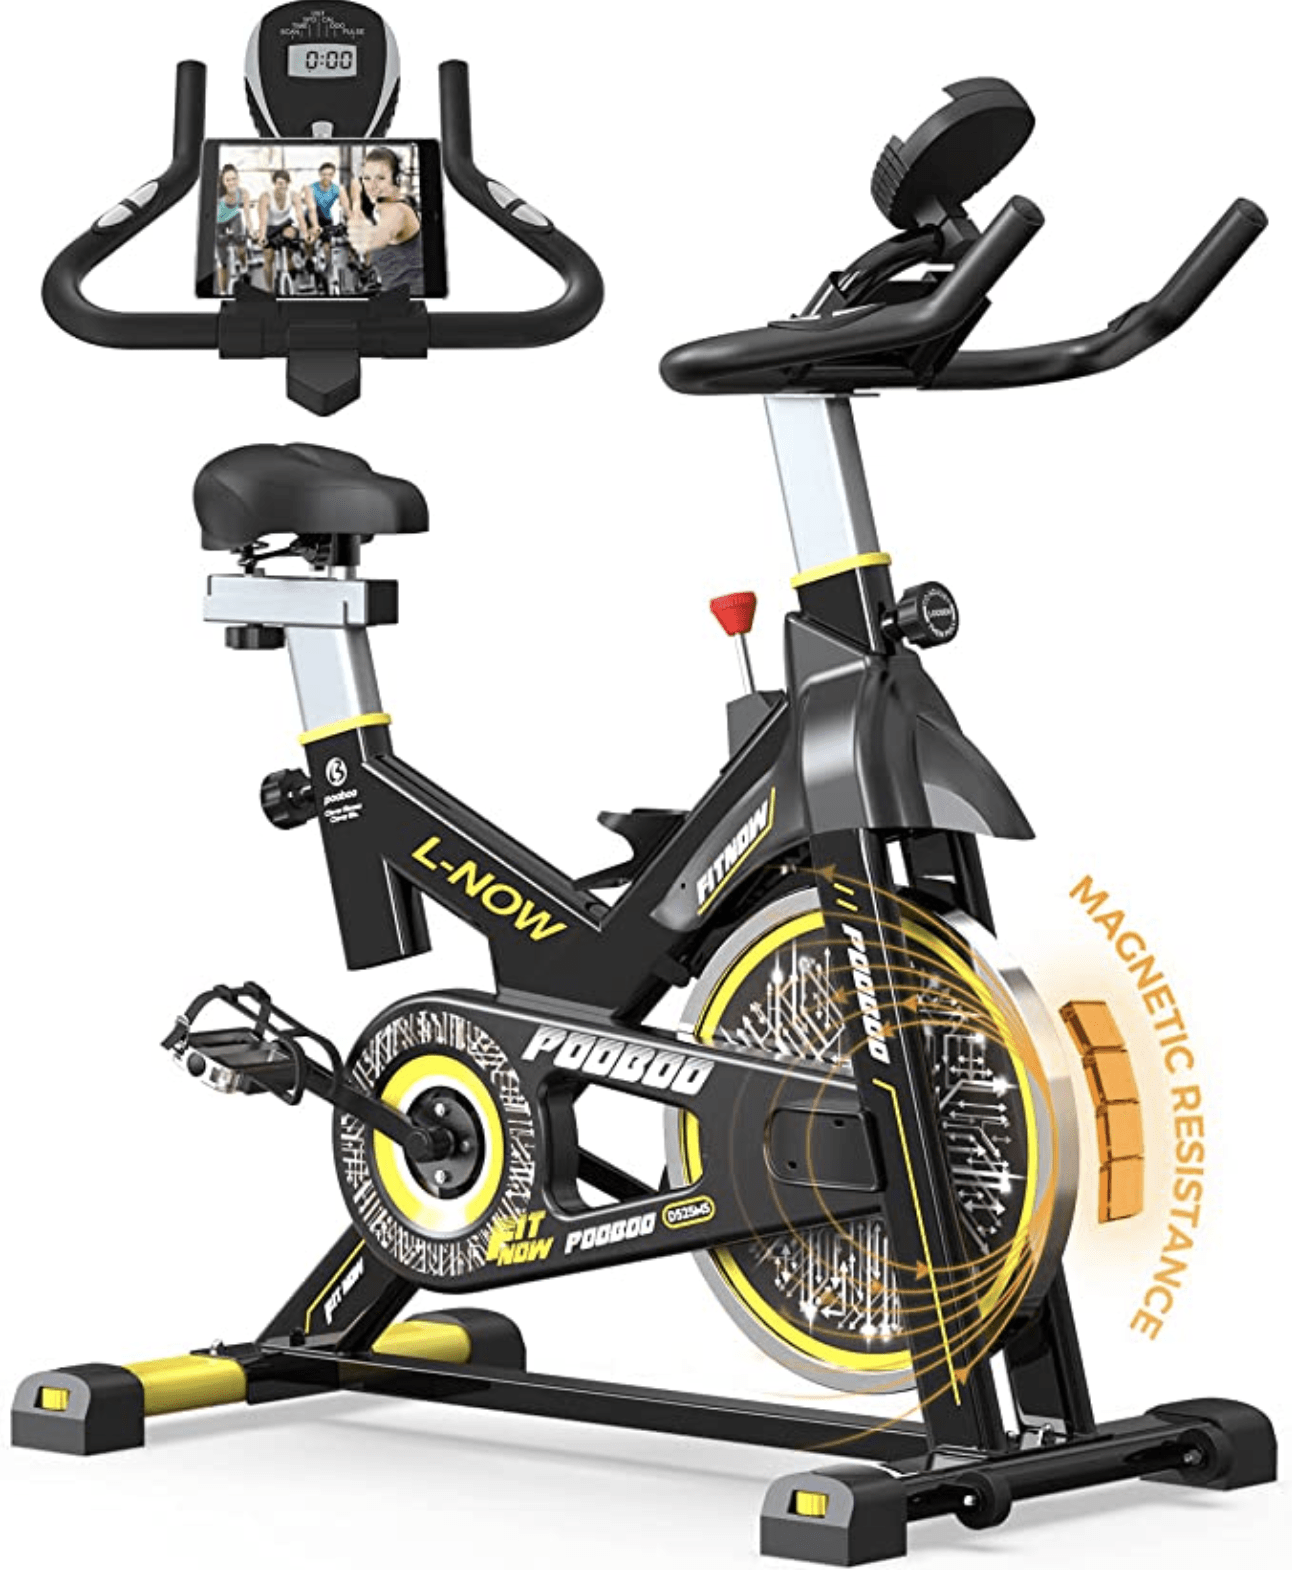 Calorie Monitor Time Distance pooboo Recumbent Exercise Bike with Adjustable Magnetic Resistance，Indoor Cycling Stationary Bike with Speed 